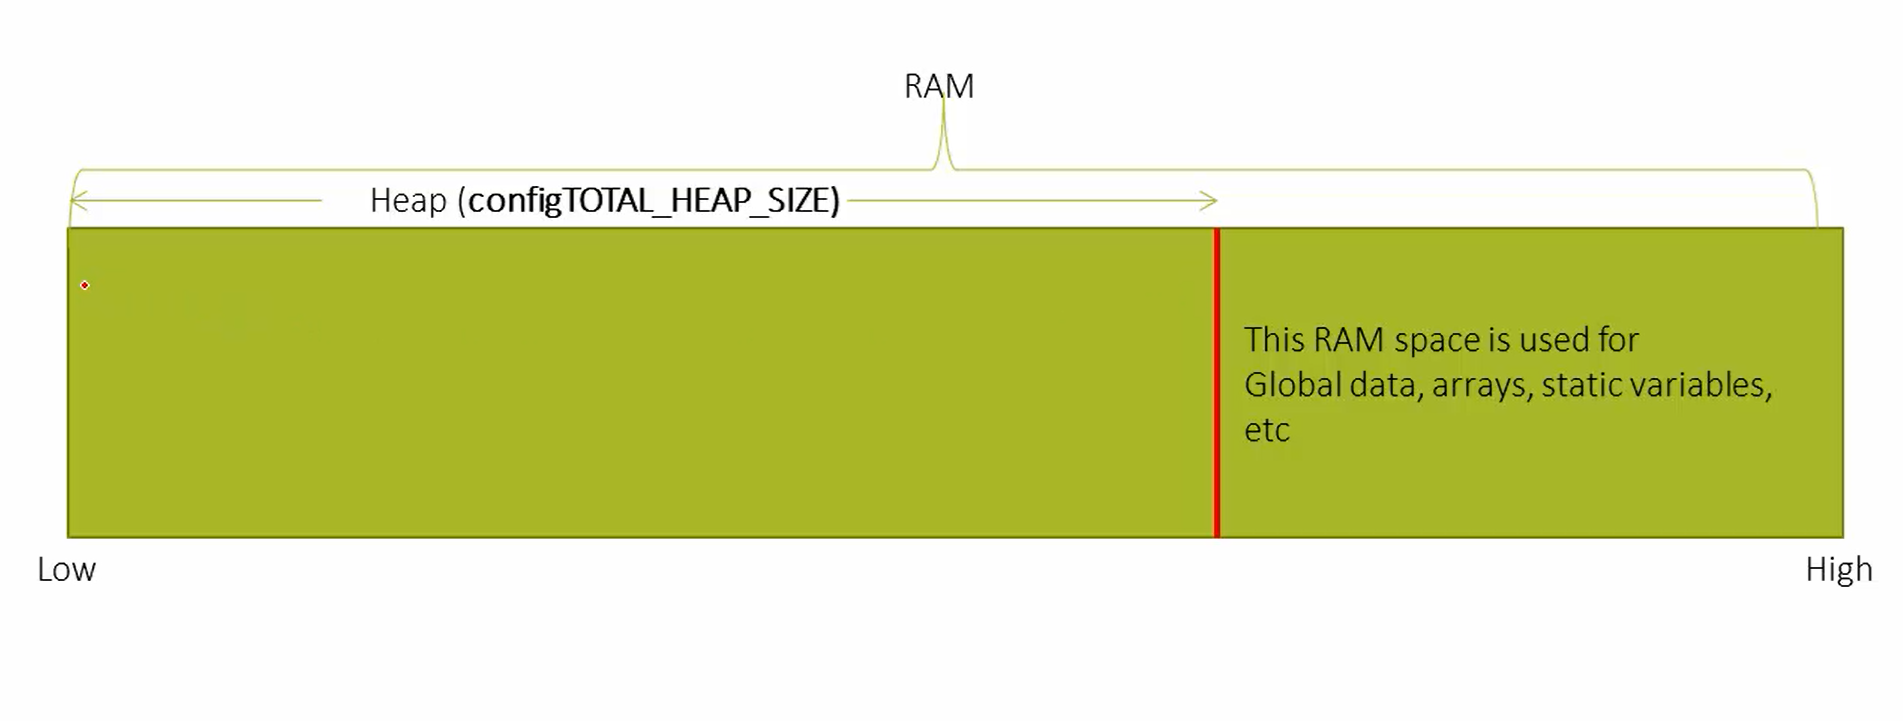 Figure 1. RAM memory space reserved for the heap purpose.